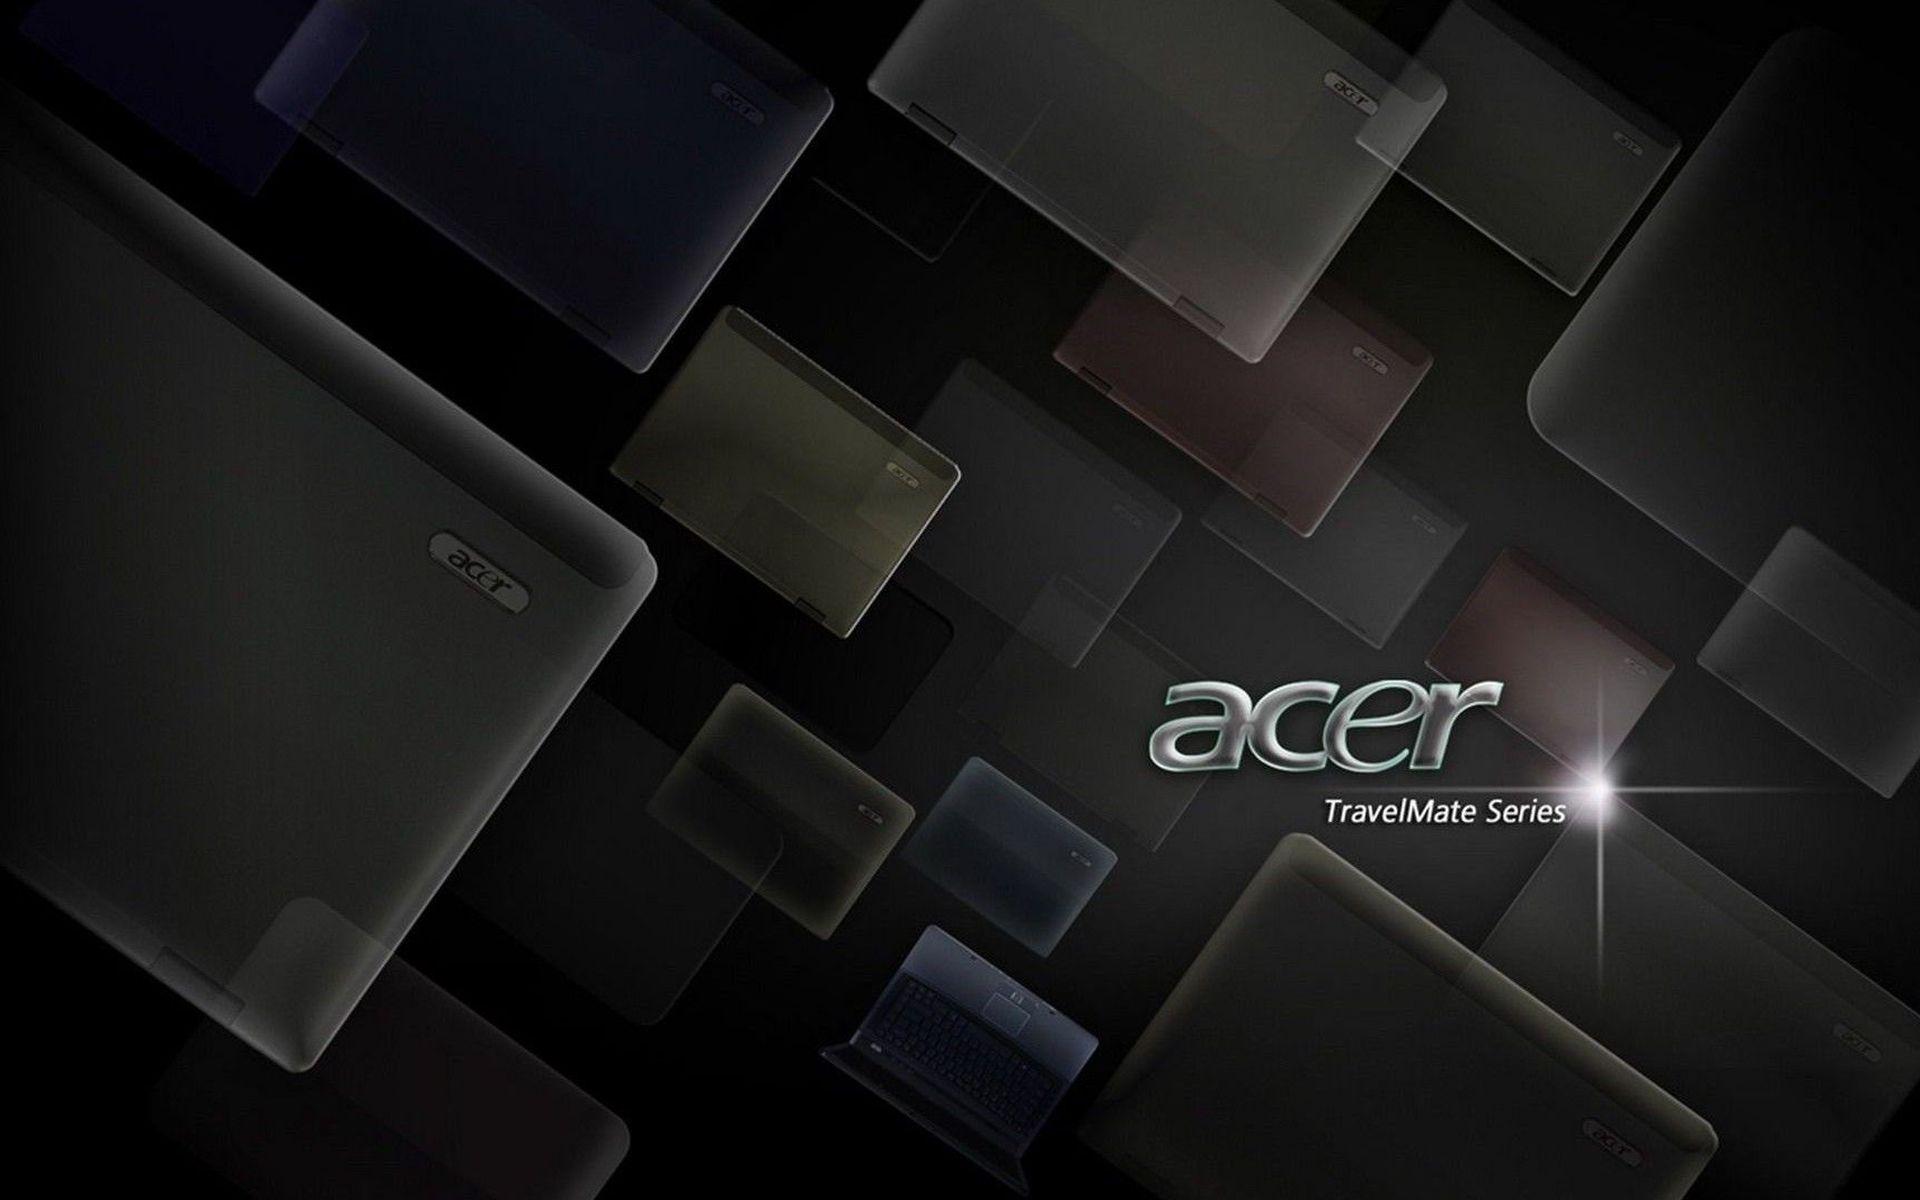 Acer Aspire Wallpaper (Picture)